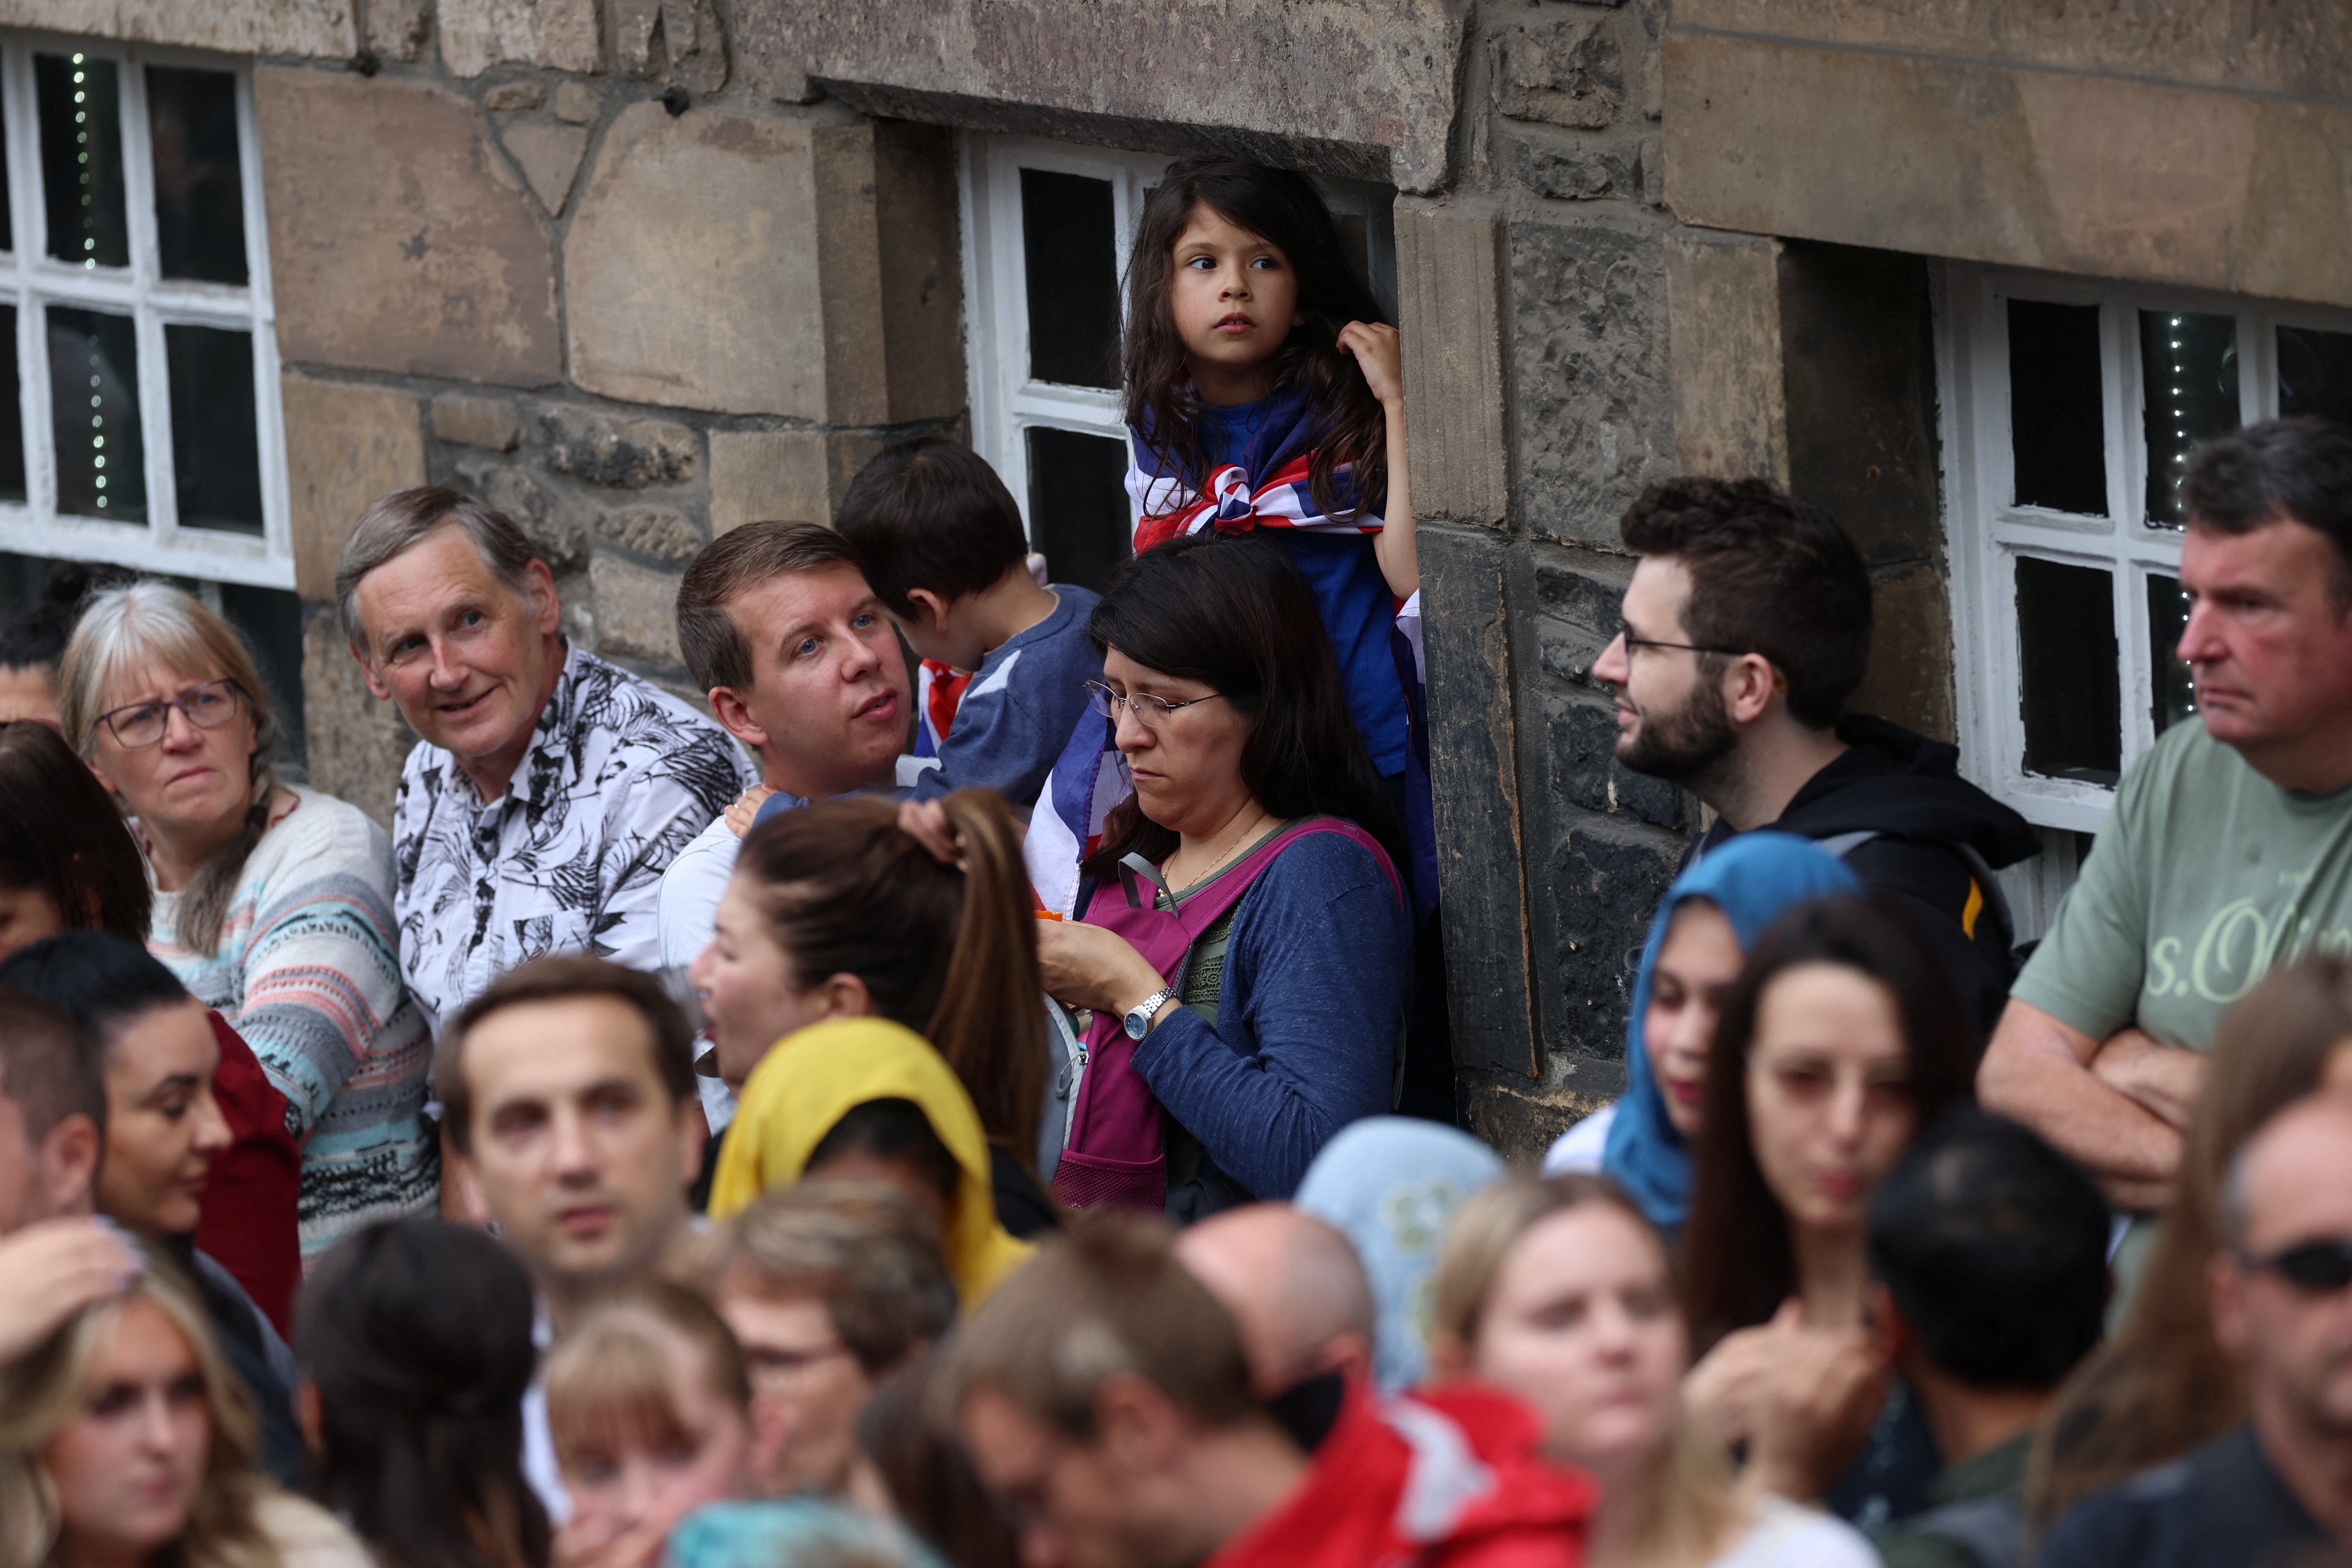 Edinburgh's famous Royal Mile was packed with people waiting to catch a glimpse on Sunday.